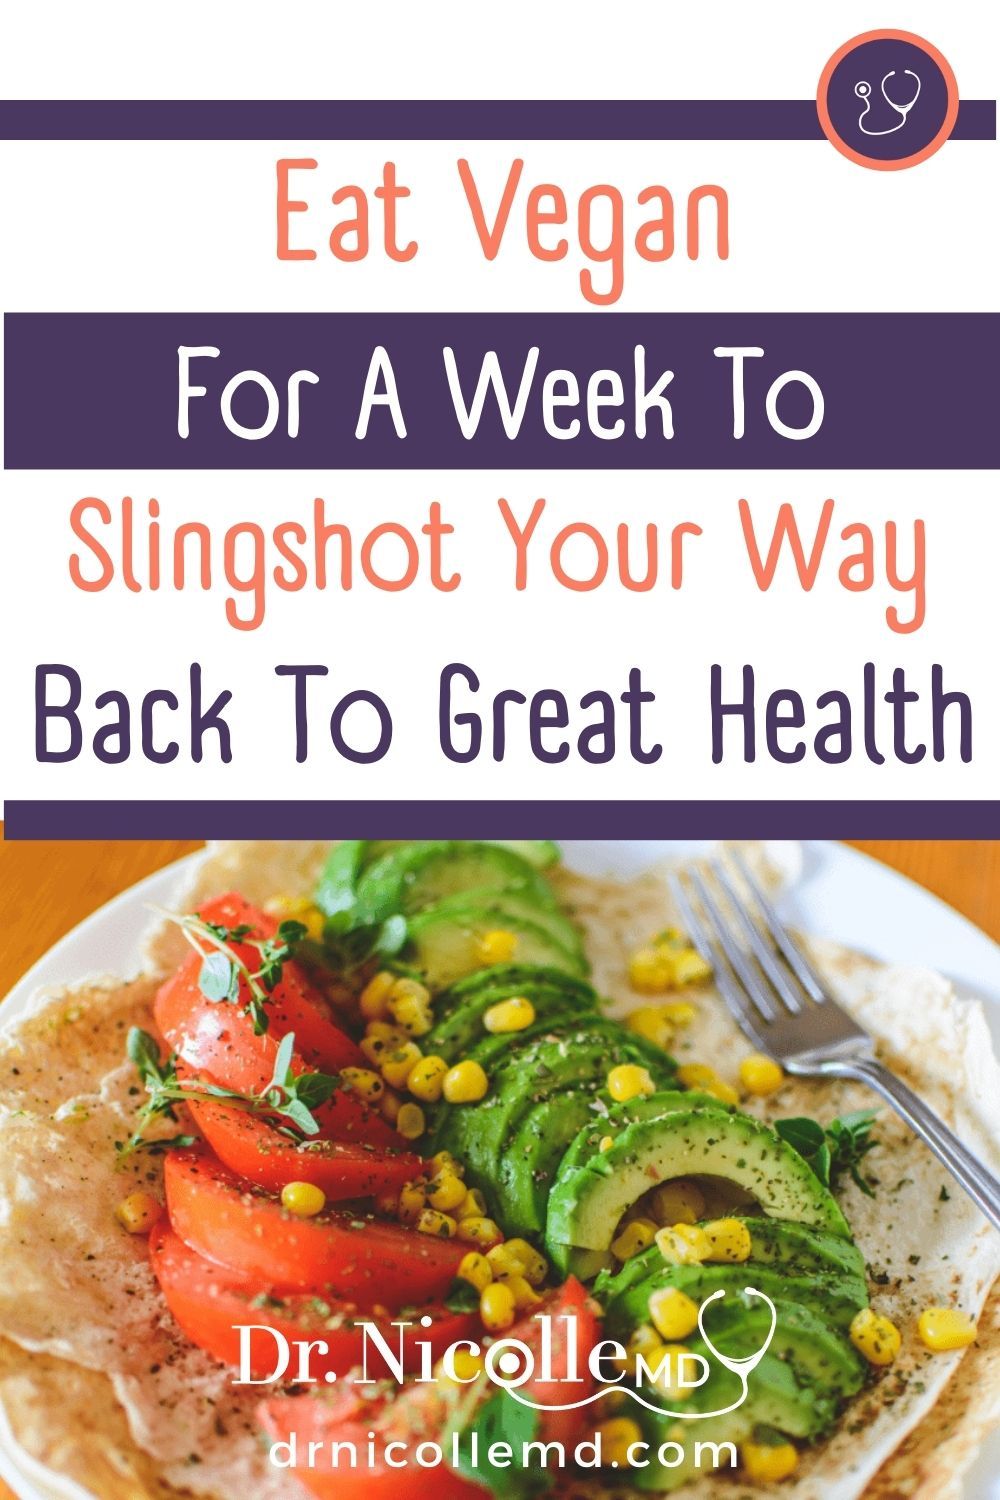 Eat Vegan For A Week To Slingshot Your Way Back To Great Health